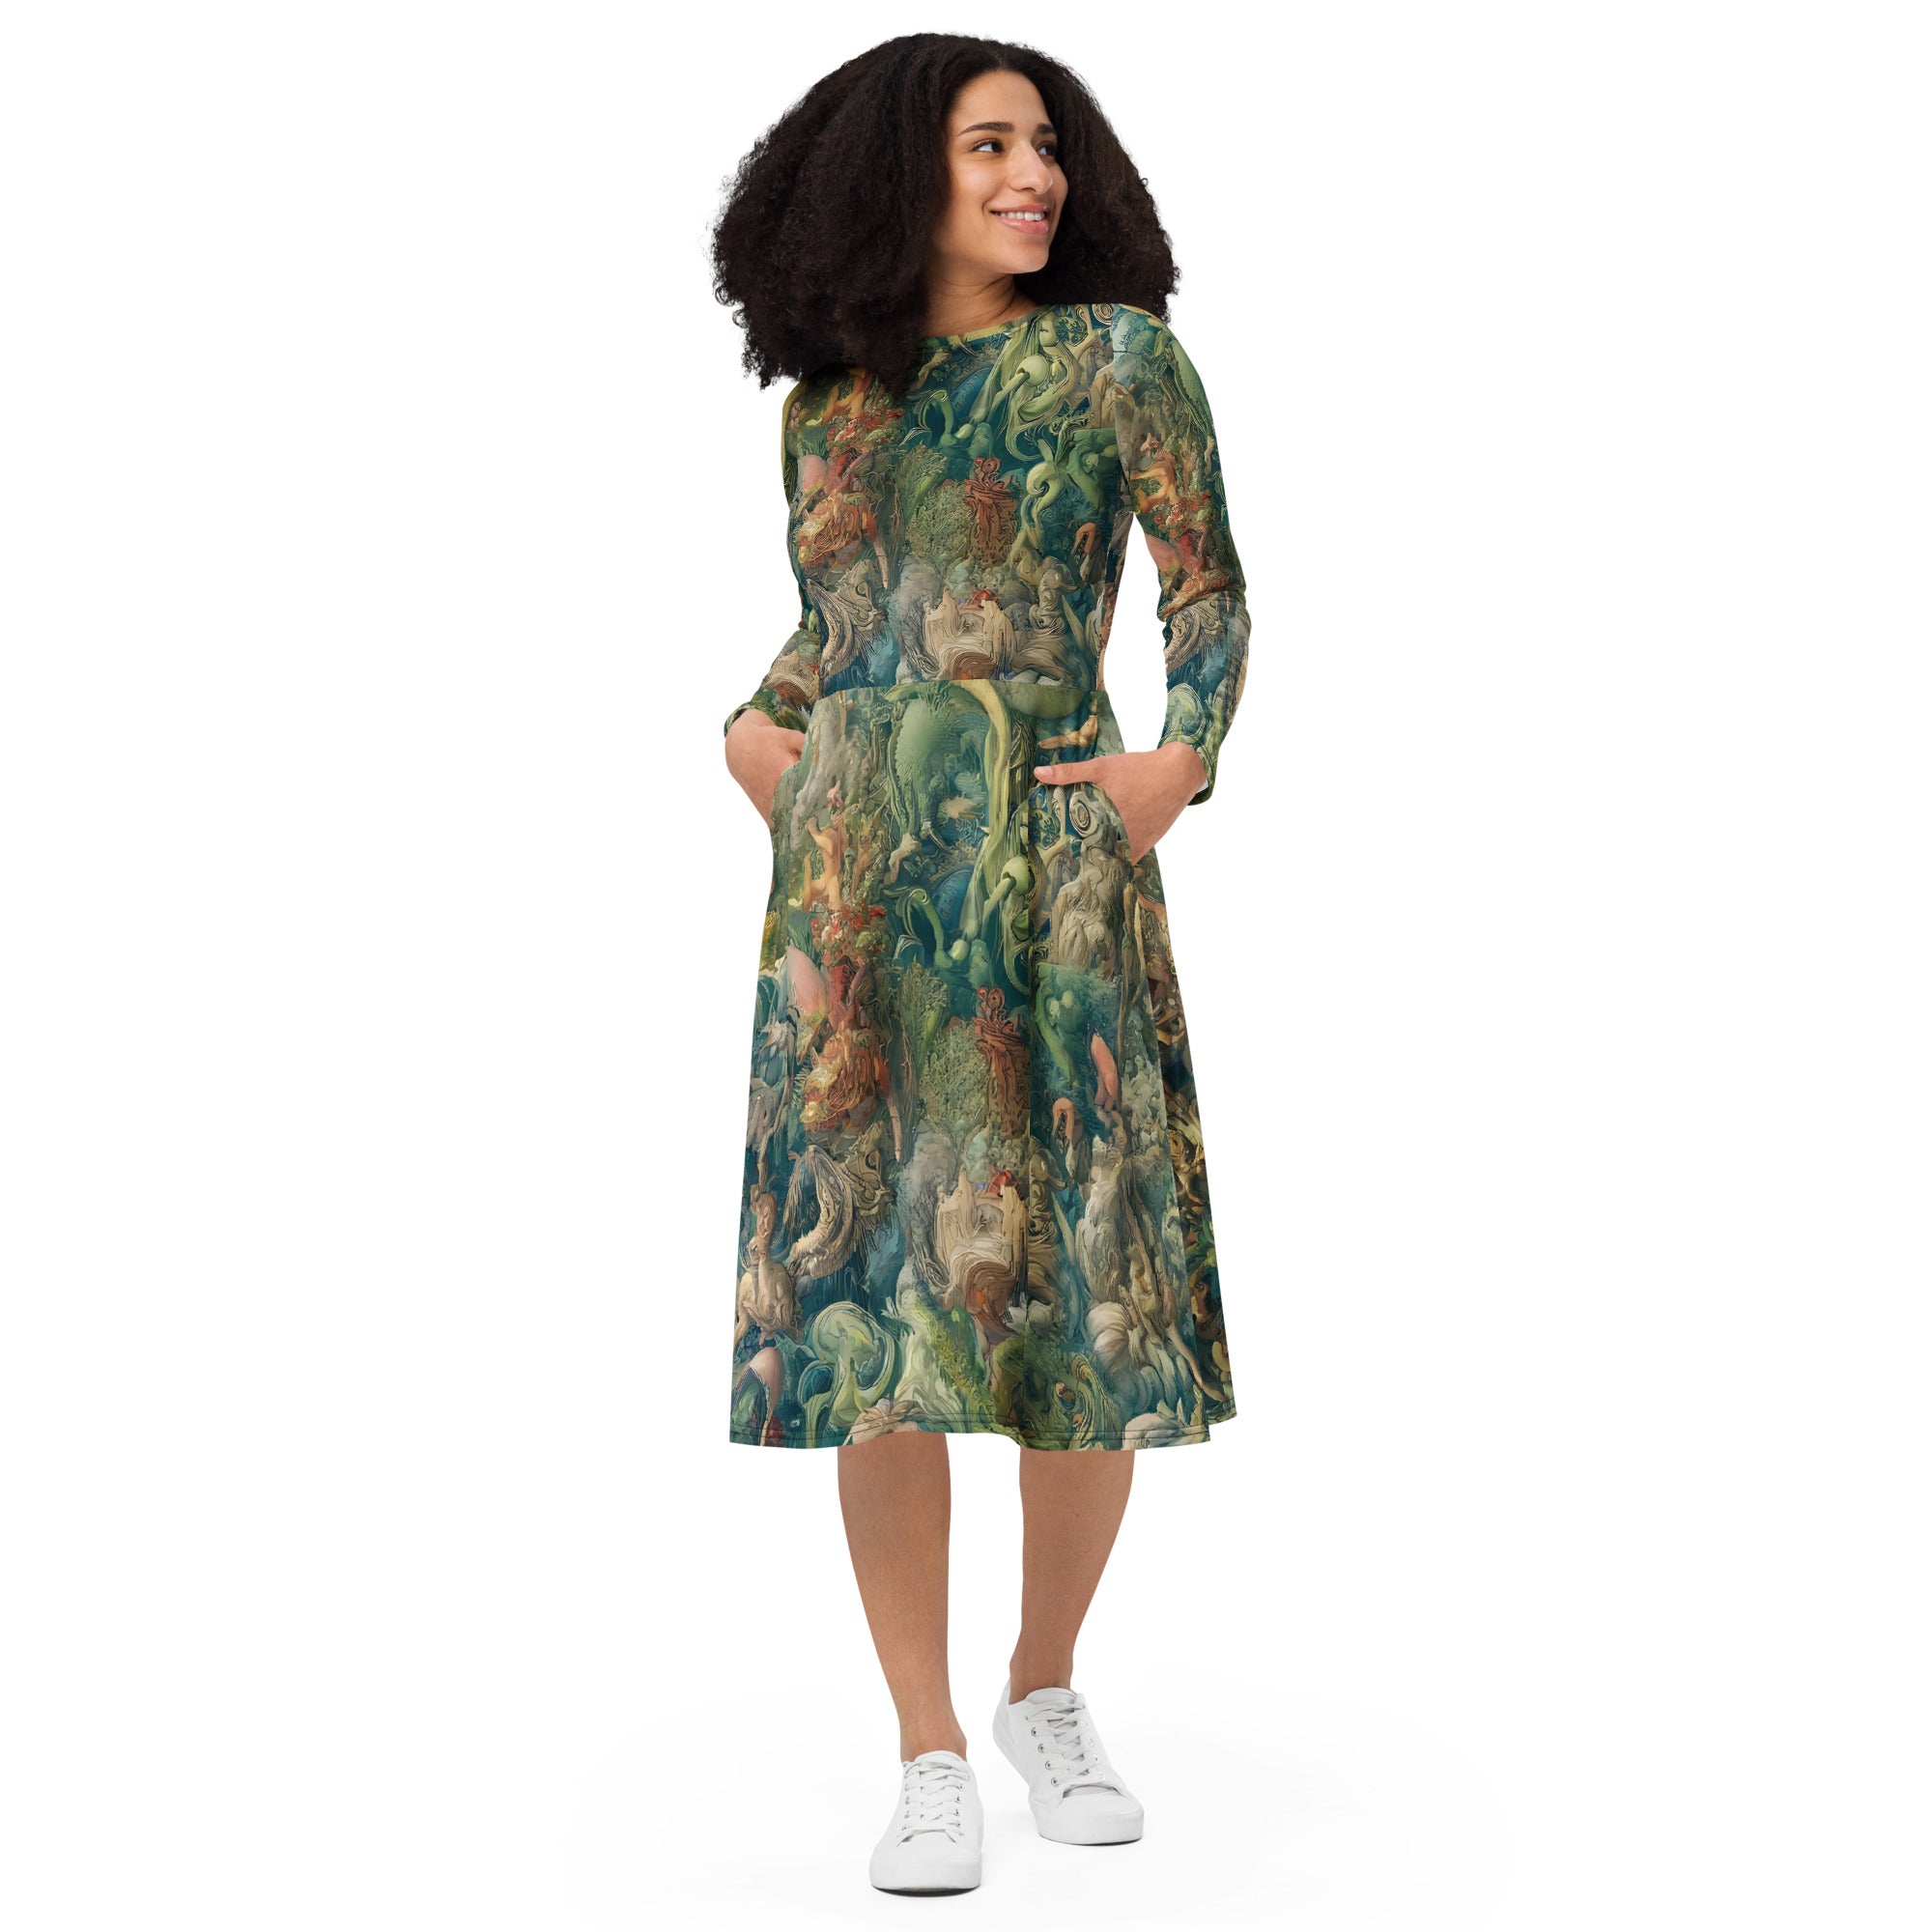 Hieronymus Bosch 'The Garden of Earthly Delights' Famous Painting Long Sleeve Midi Dress | Premium Art Midi Dress